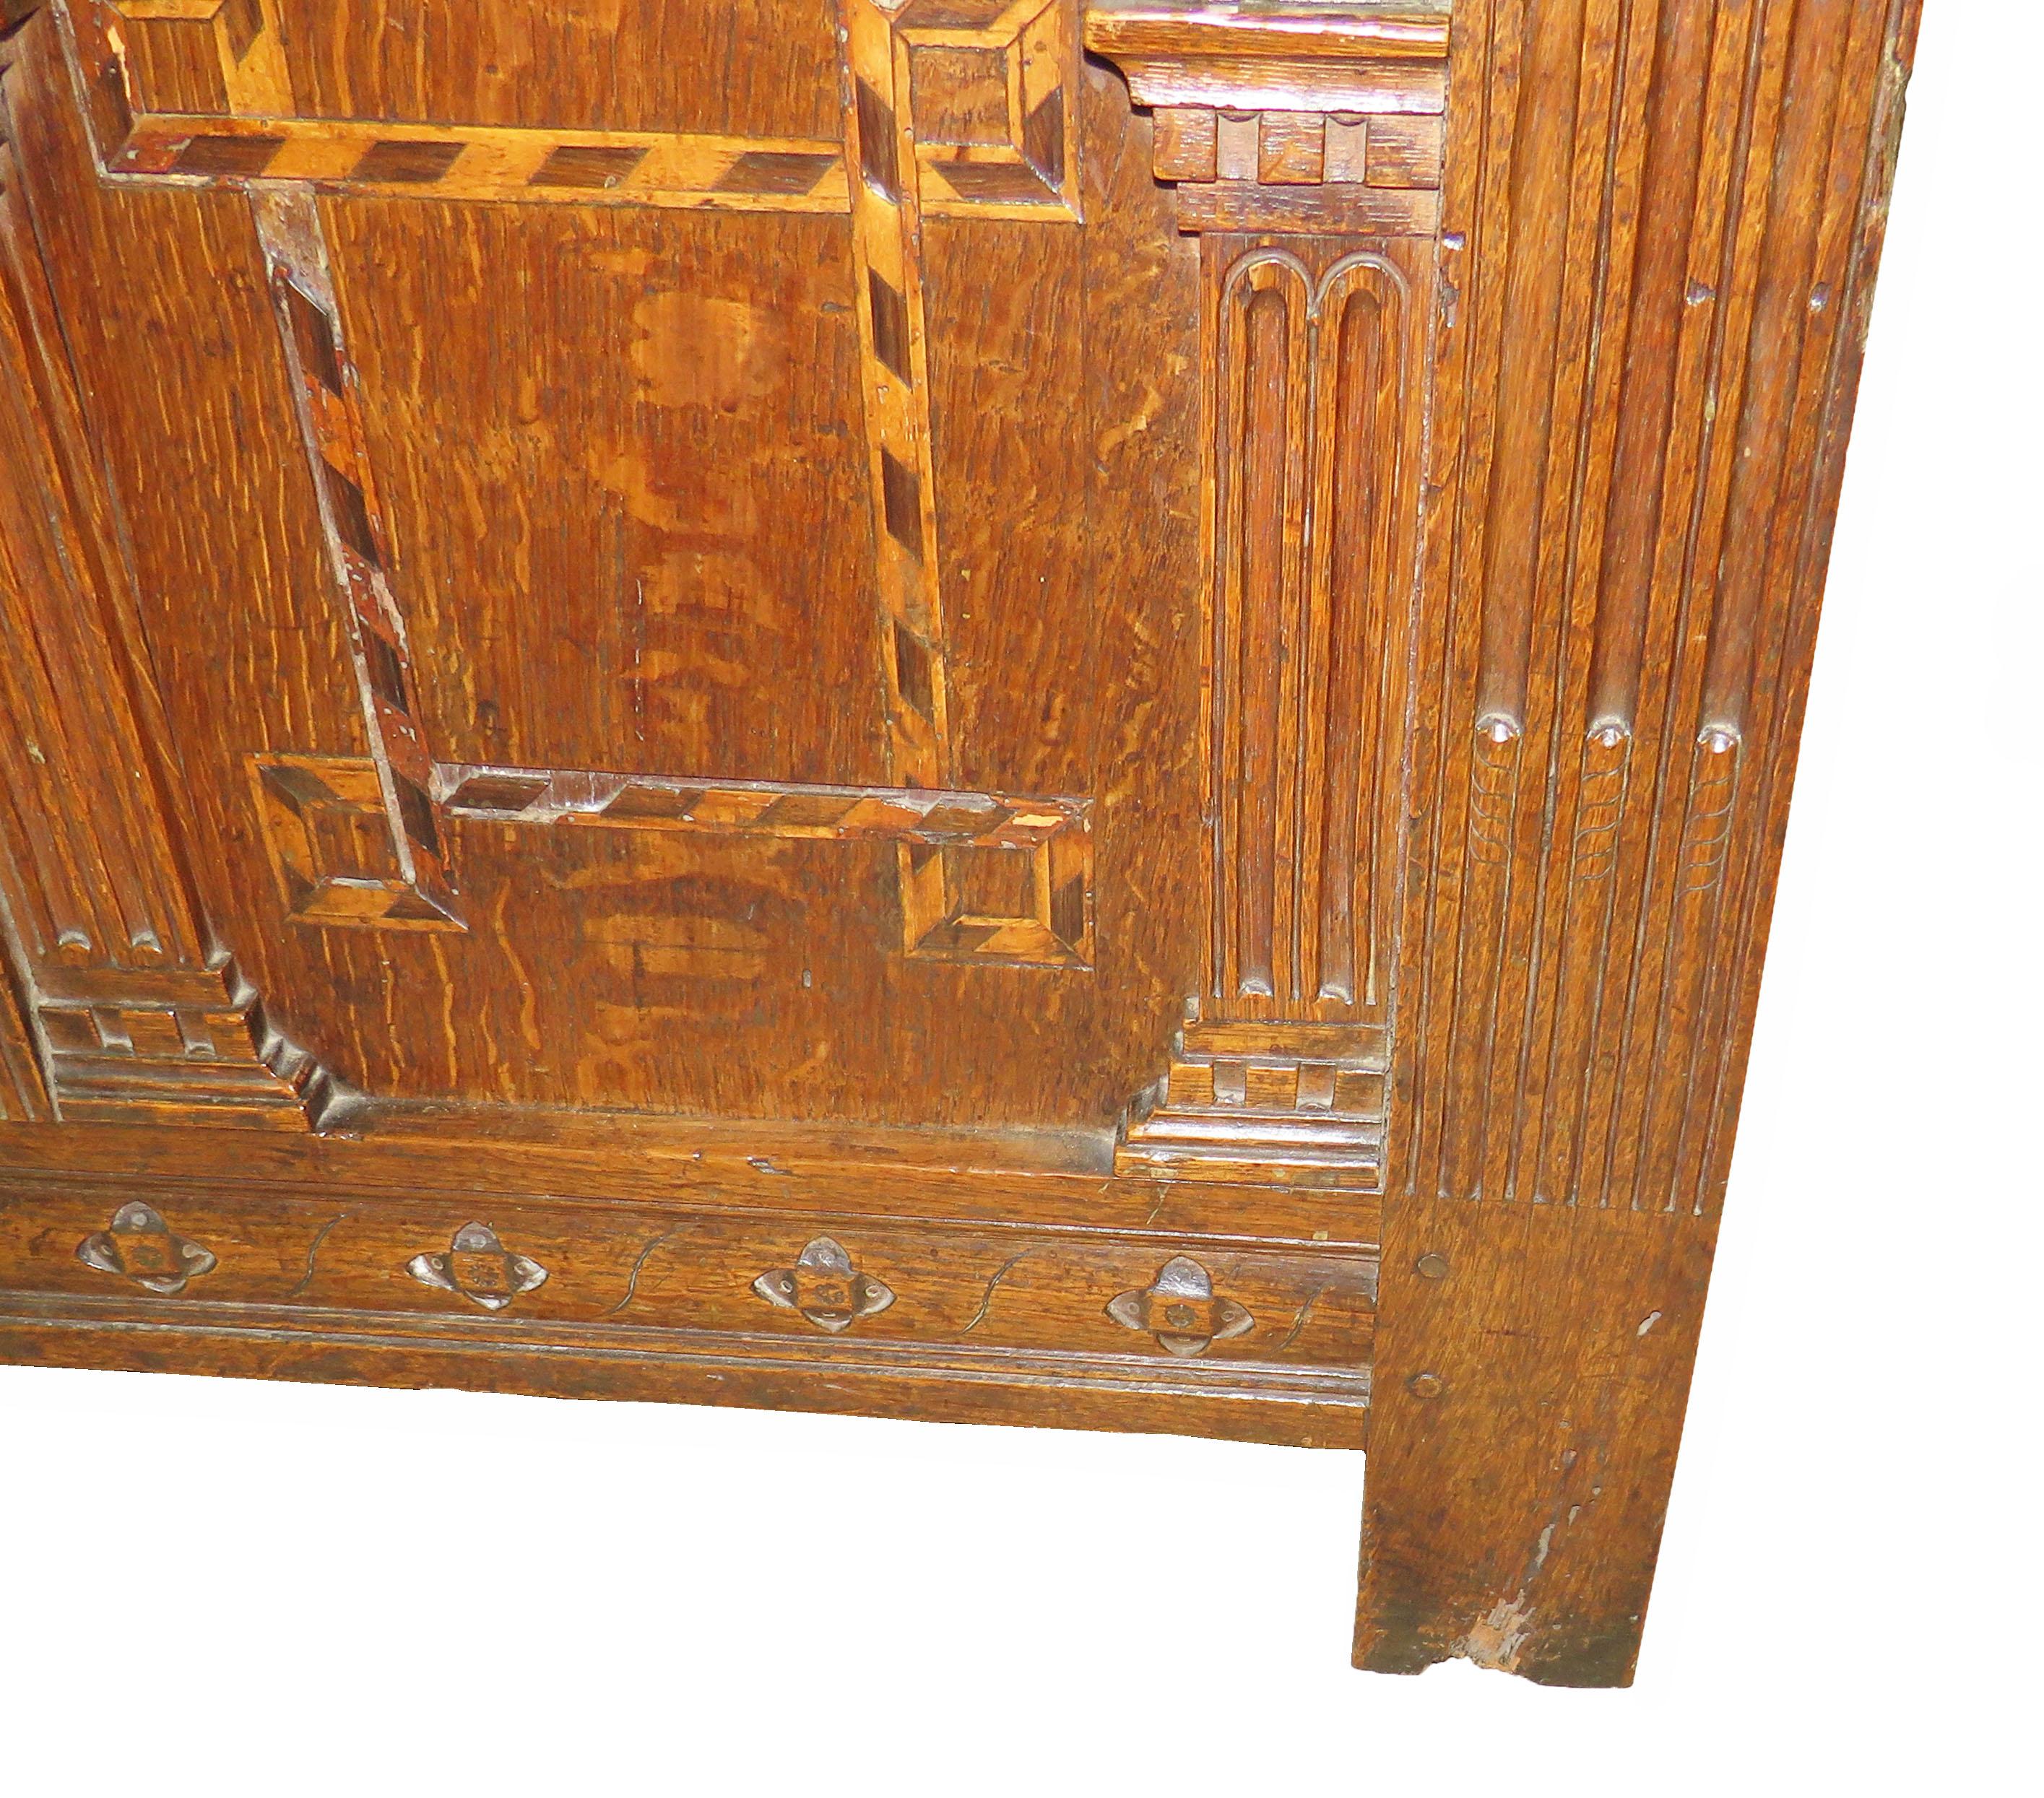 A very rare, charming and untouched early 17th
century Charles 1 period English oak coffer of good
bold proportions having unusual plank lid with original
hinges, lock and key, over attractive carved arcade
front including interlocking flower